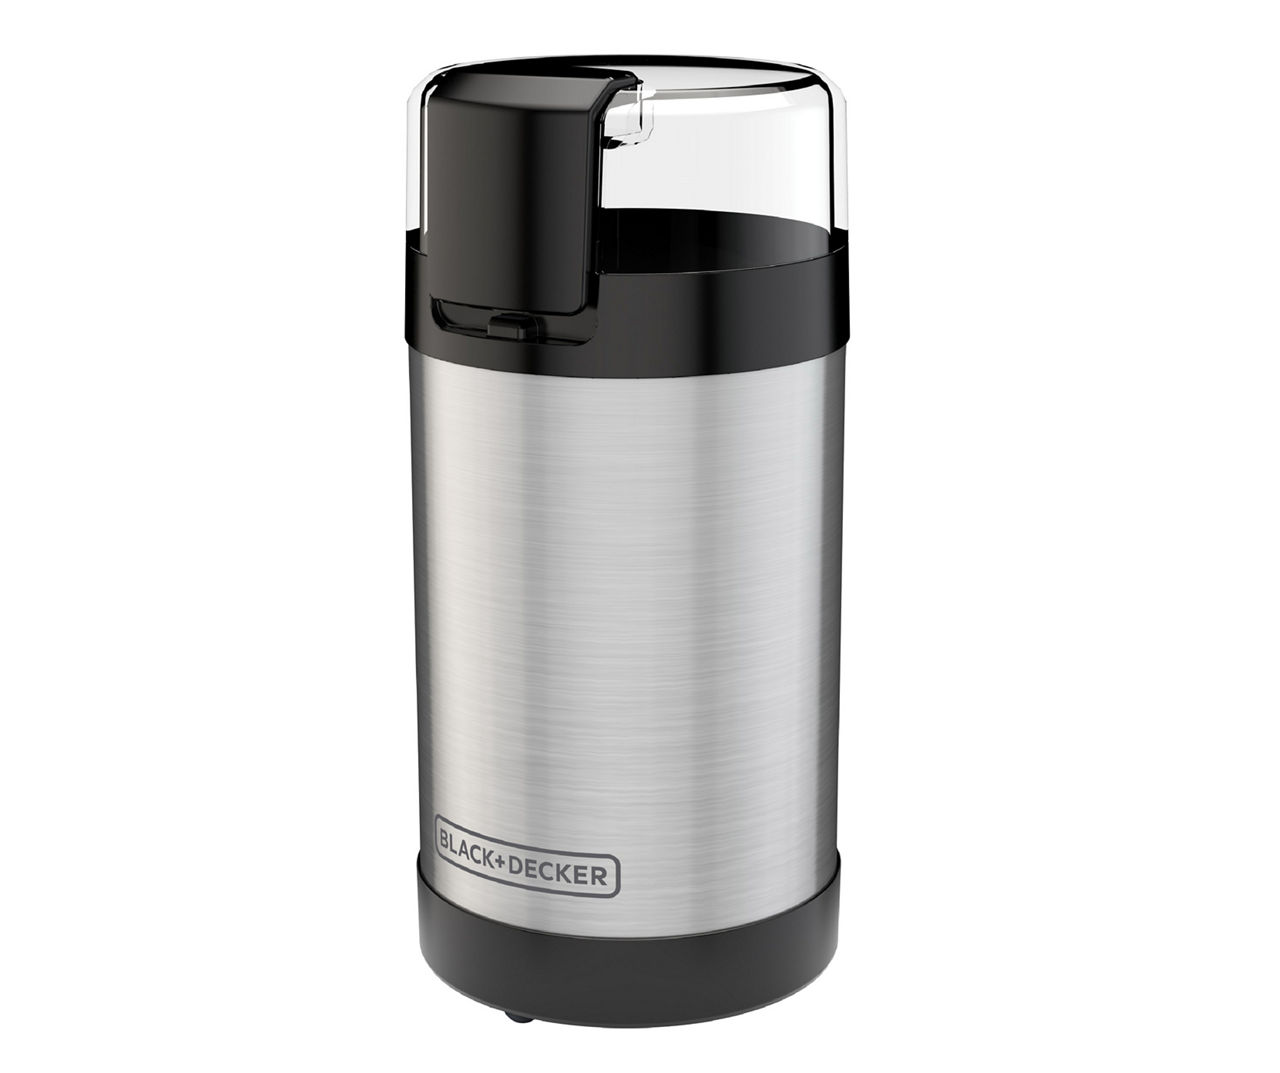 Coffee Ginders  SmartGrind™ Electric Coffee and Spice Grinder